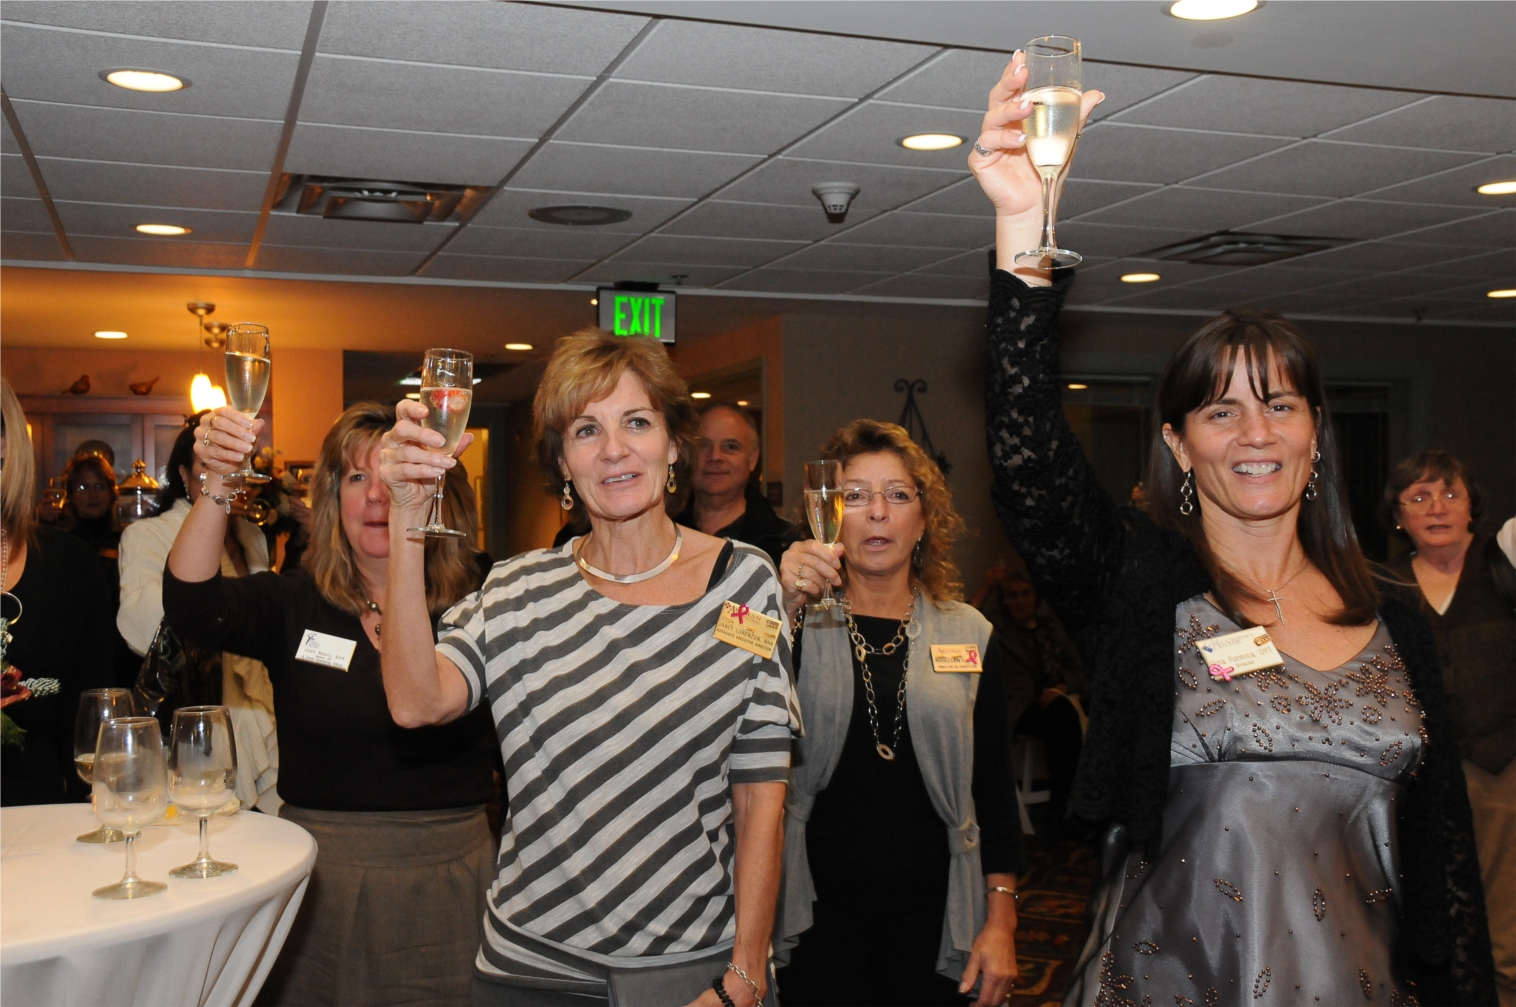 Artman employees cheers to 95 years as leaders in compassionate care